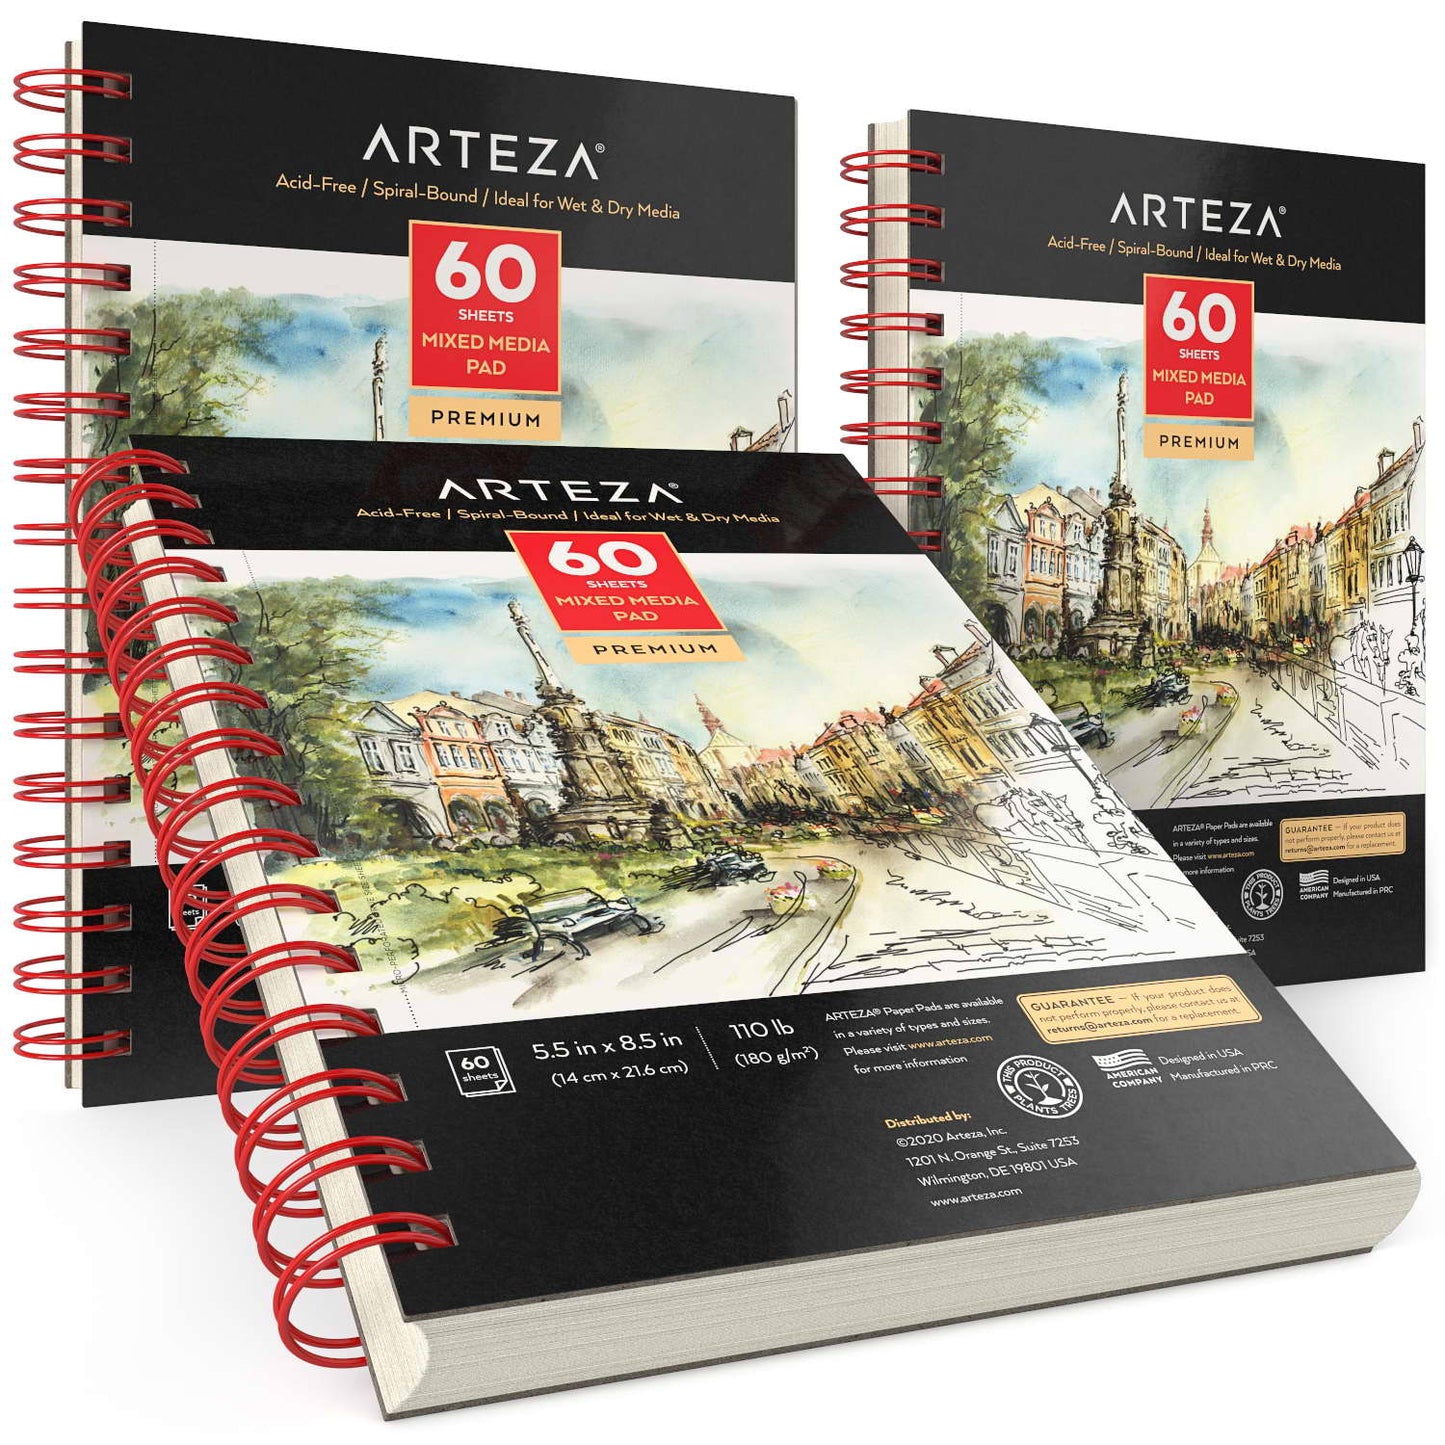 Arteza Watercolor Sketchbook, 8.3 x 5.1 Inches, 76-Page Journal with 110lb  Cold Press Watercolor Paper, Inner Pocket, and Elastic Strap, Art Supplies  for Watercolor and Mixed Media 5.1x8.3 1 Pack